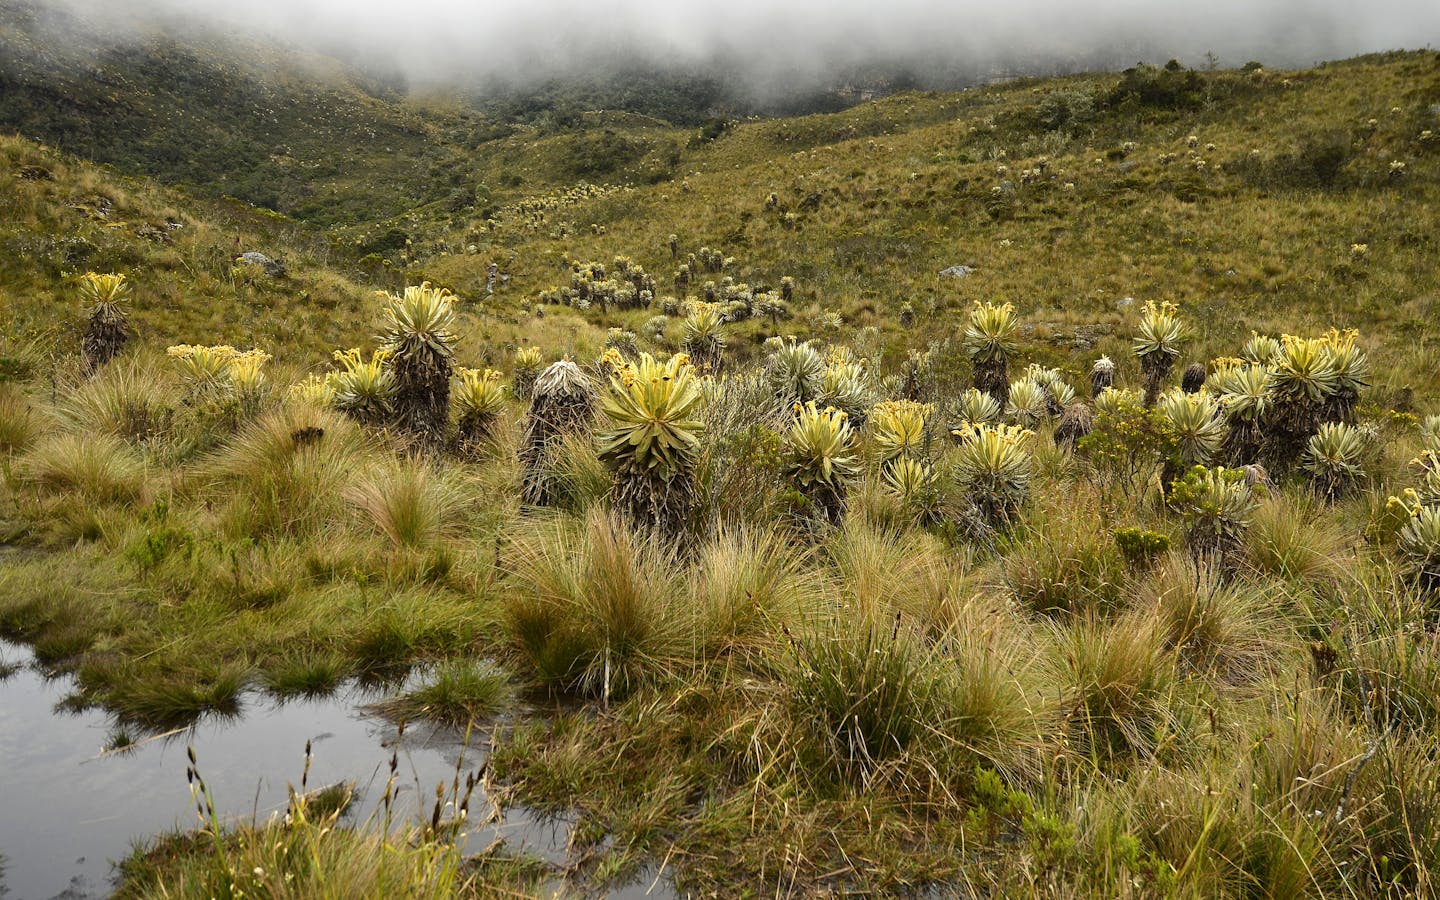 Much of South America's water originates in the high Andes. Paramo vegetation acts like a sponge to absorb water which is then delivered to people downstream.